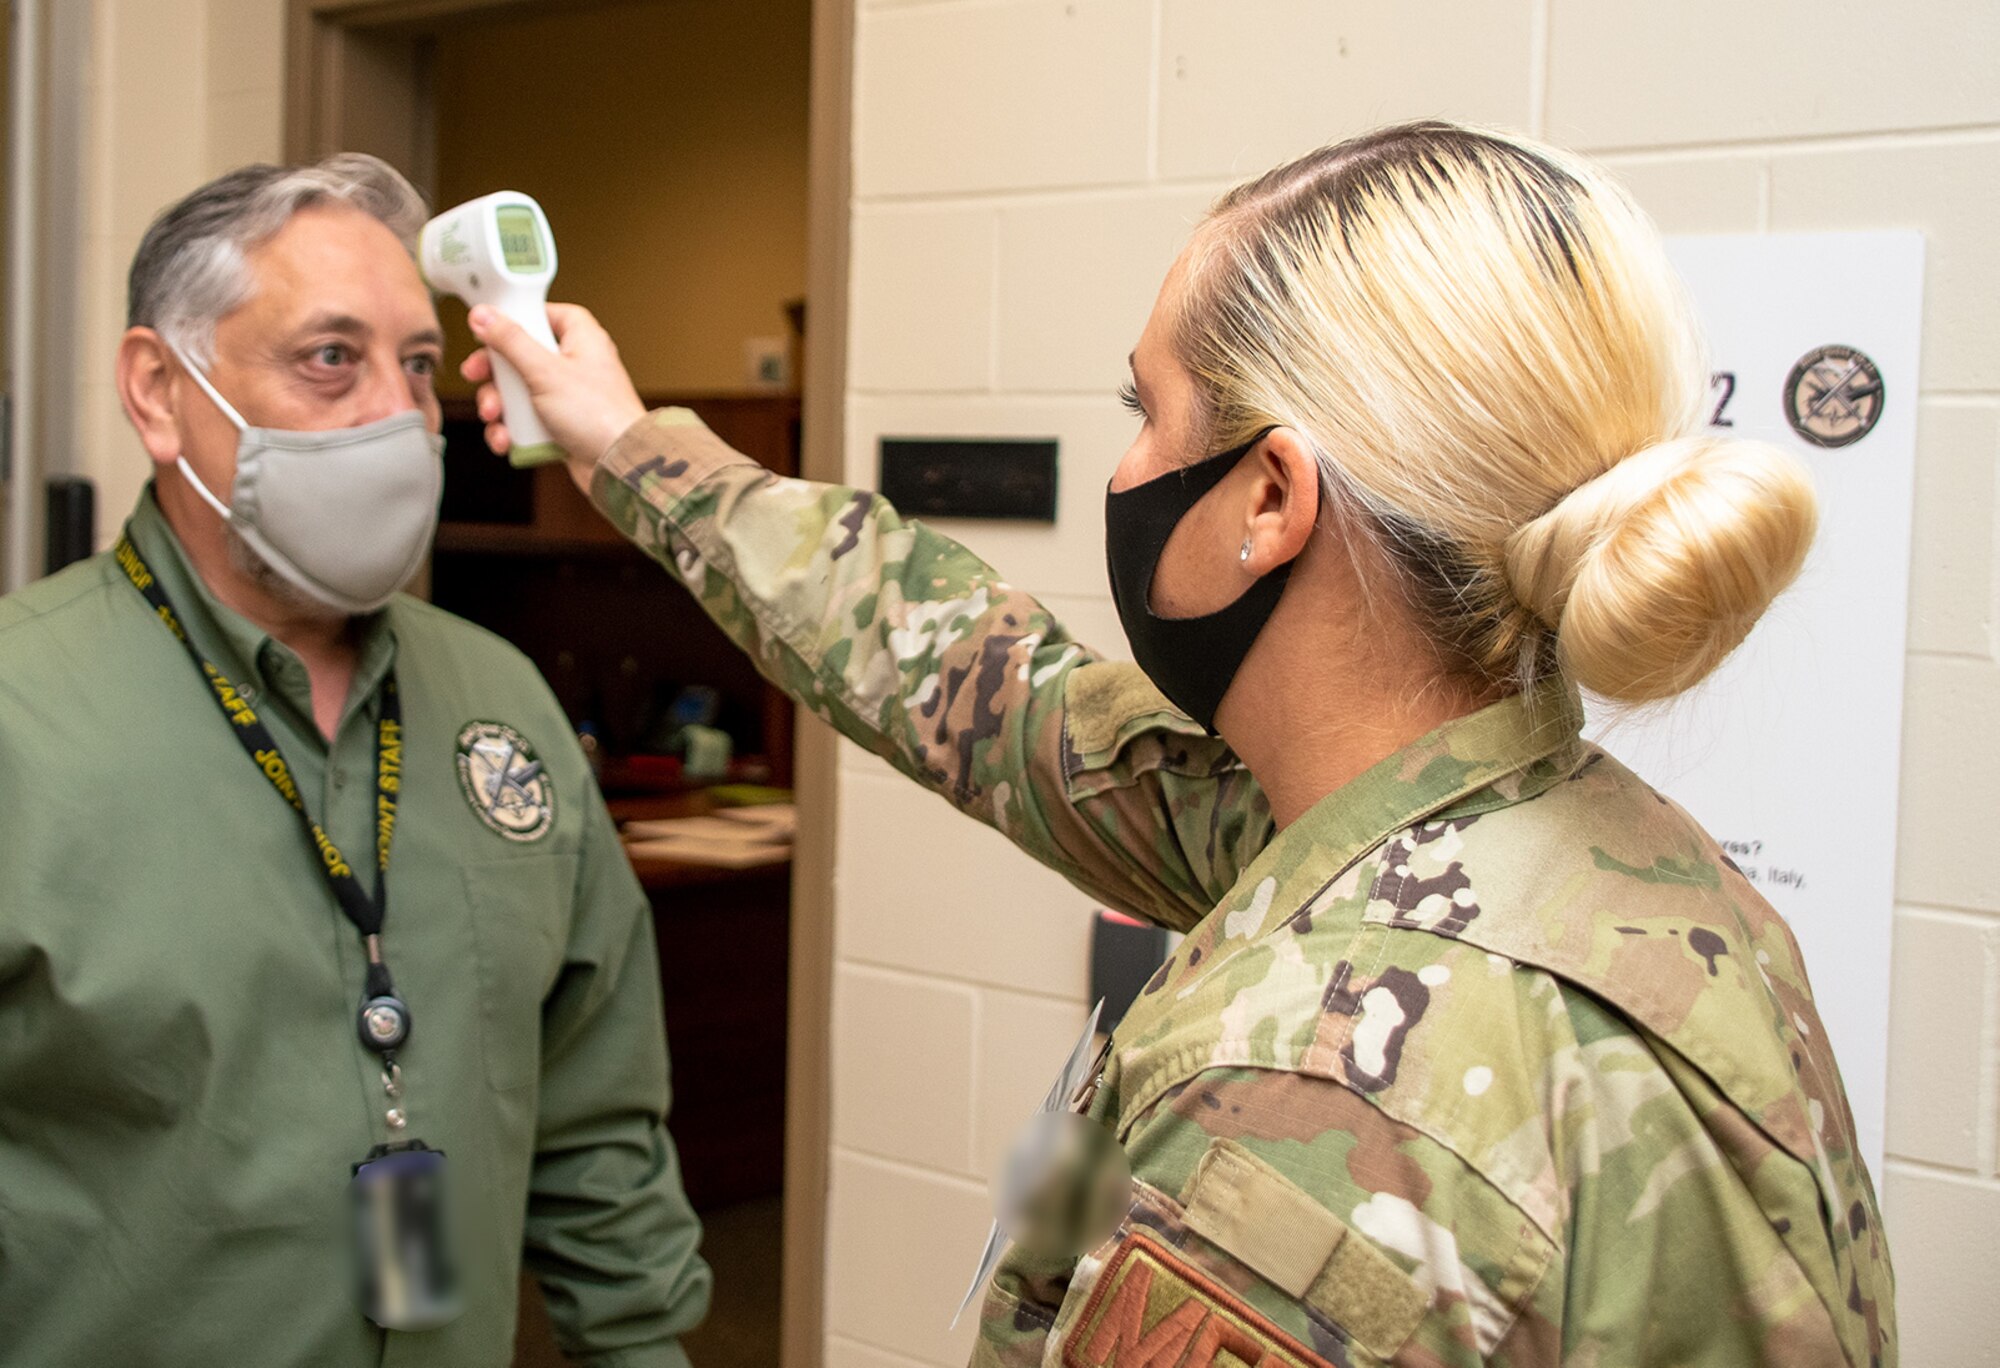 CAMP ATTERBURY, IND. (OCT. 10, 2020) Joseph Chacon, Joint Staff Bold Quest Operations Director, has his temperature checked by Technical Sergeant Alexandria Harville, an aerospace medical technician assigned to the Virginia Air National Guard 192nd Medical Group  during capability demonstration Bold Quest 20.2. Members of the 192nd Medical Group helped develop the medical standard operating procedures for Bold Quest participants to prevent and respond to any COVID-19 outbreak. (U.S. Navy photo by Mass Communication Specialist 2nd Class Jonathan Word)